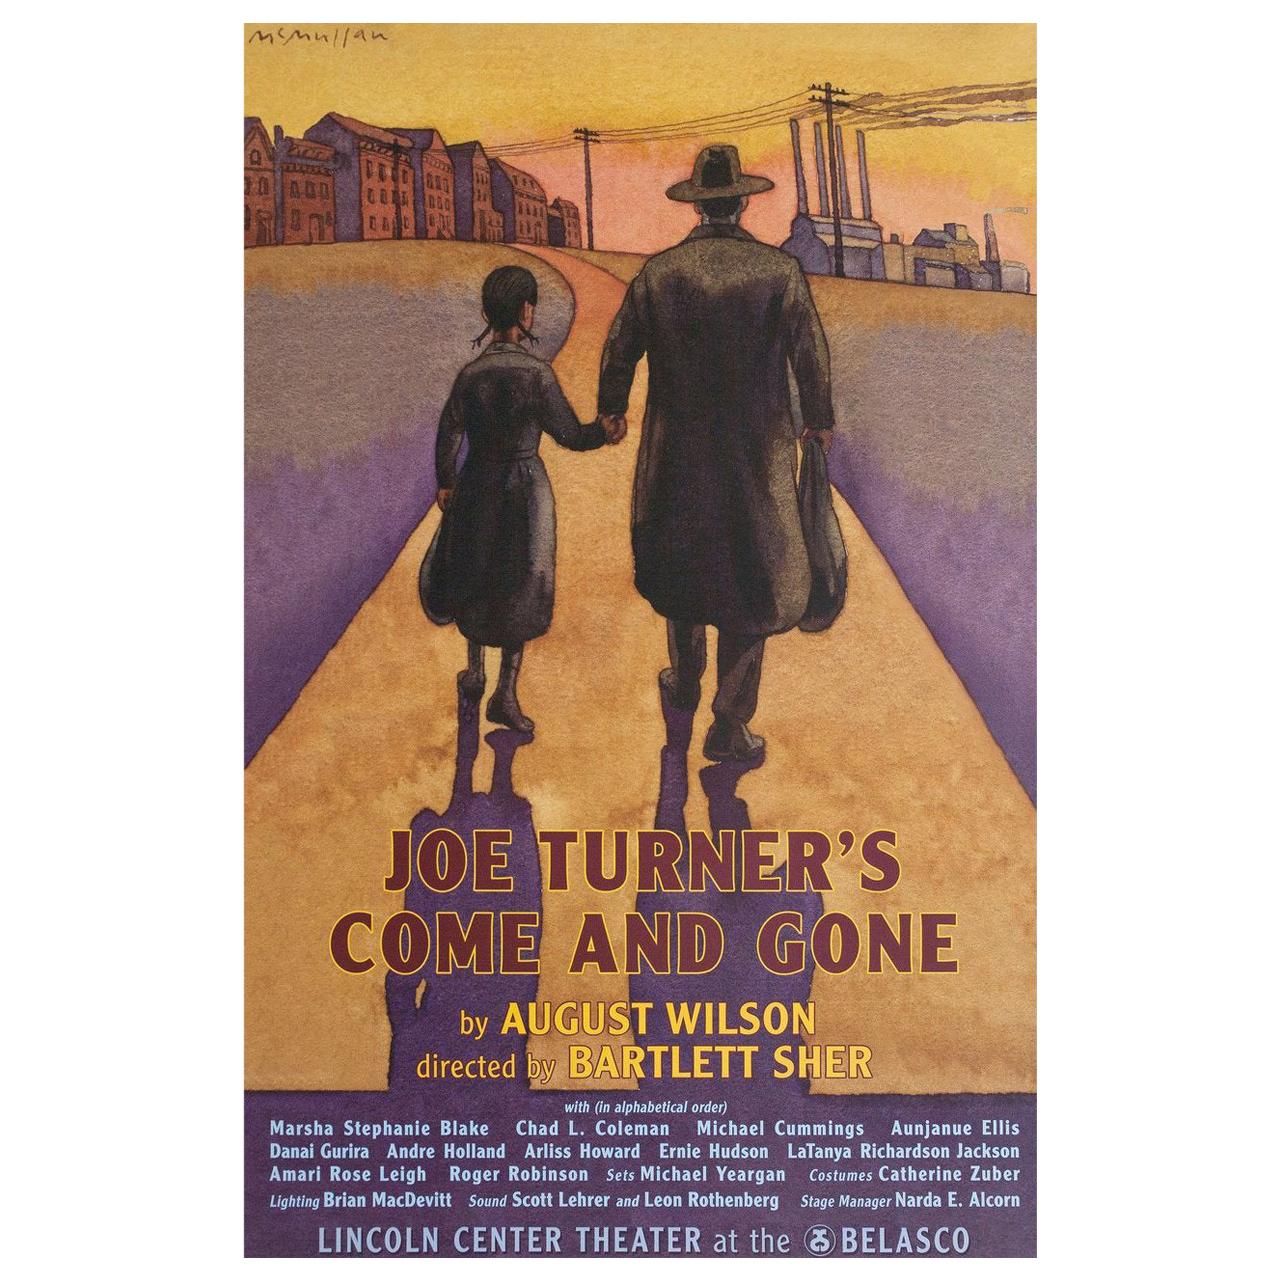 "Joe Turner's Come and Gone" R2009 U.S. Window Card Theatre Poster